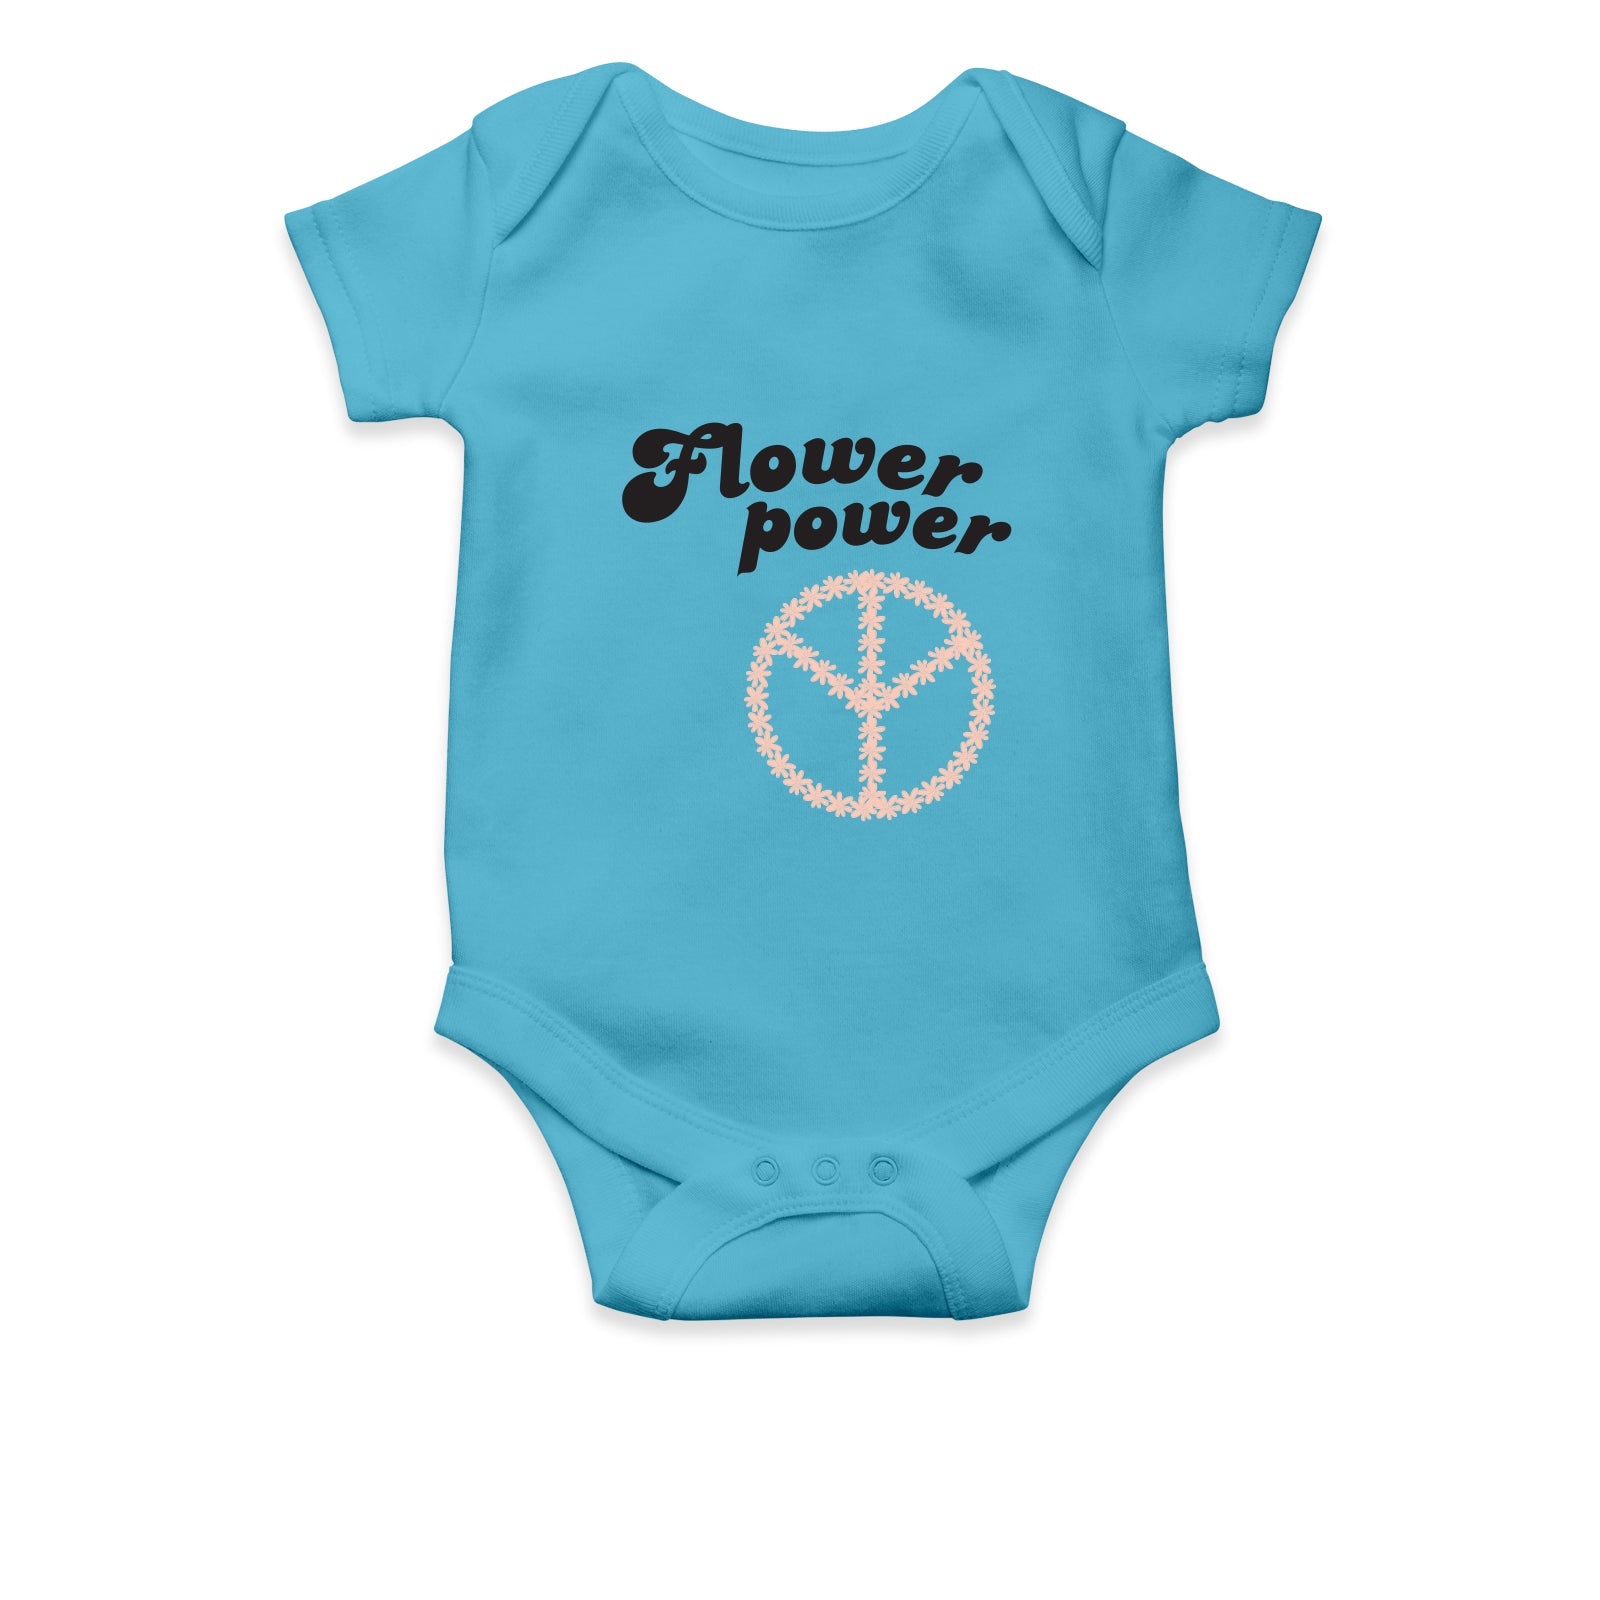 Personalised White Baby Body Suit Grow Vest - Peace Baby